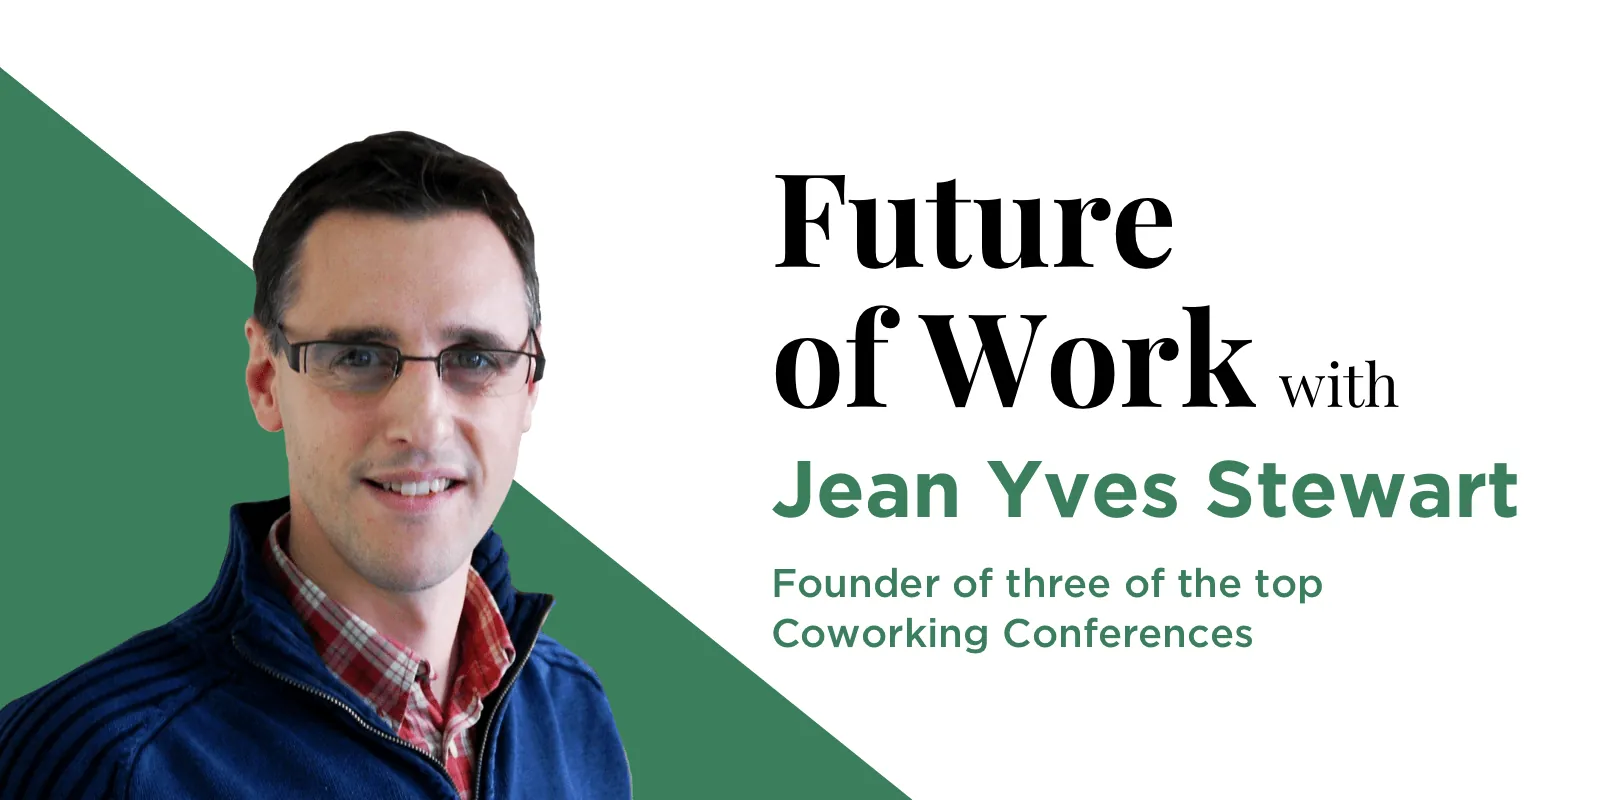 Future of work with Jean-Yves Huwart